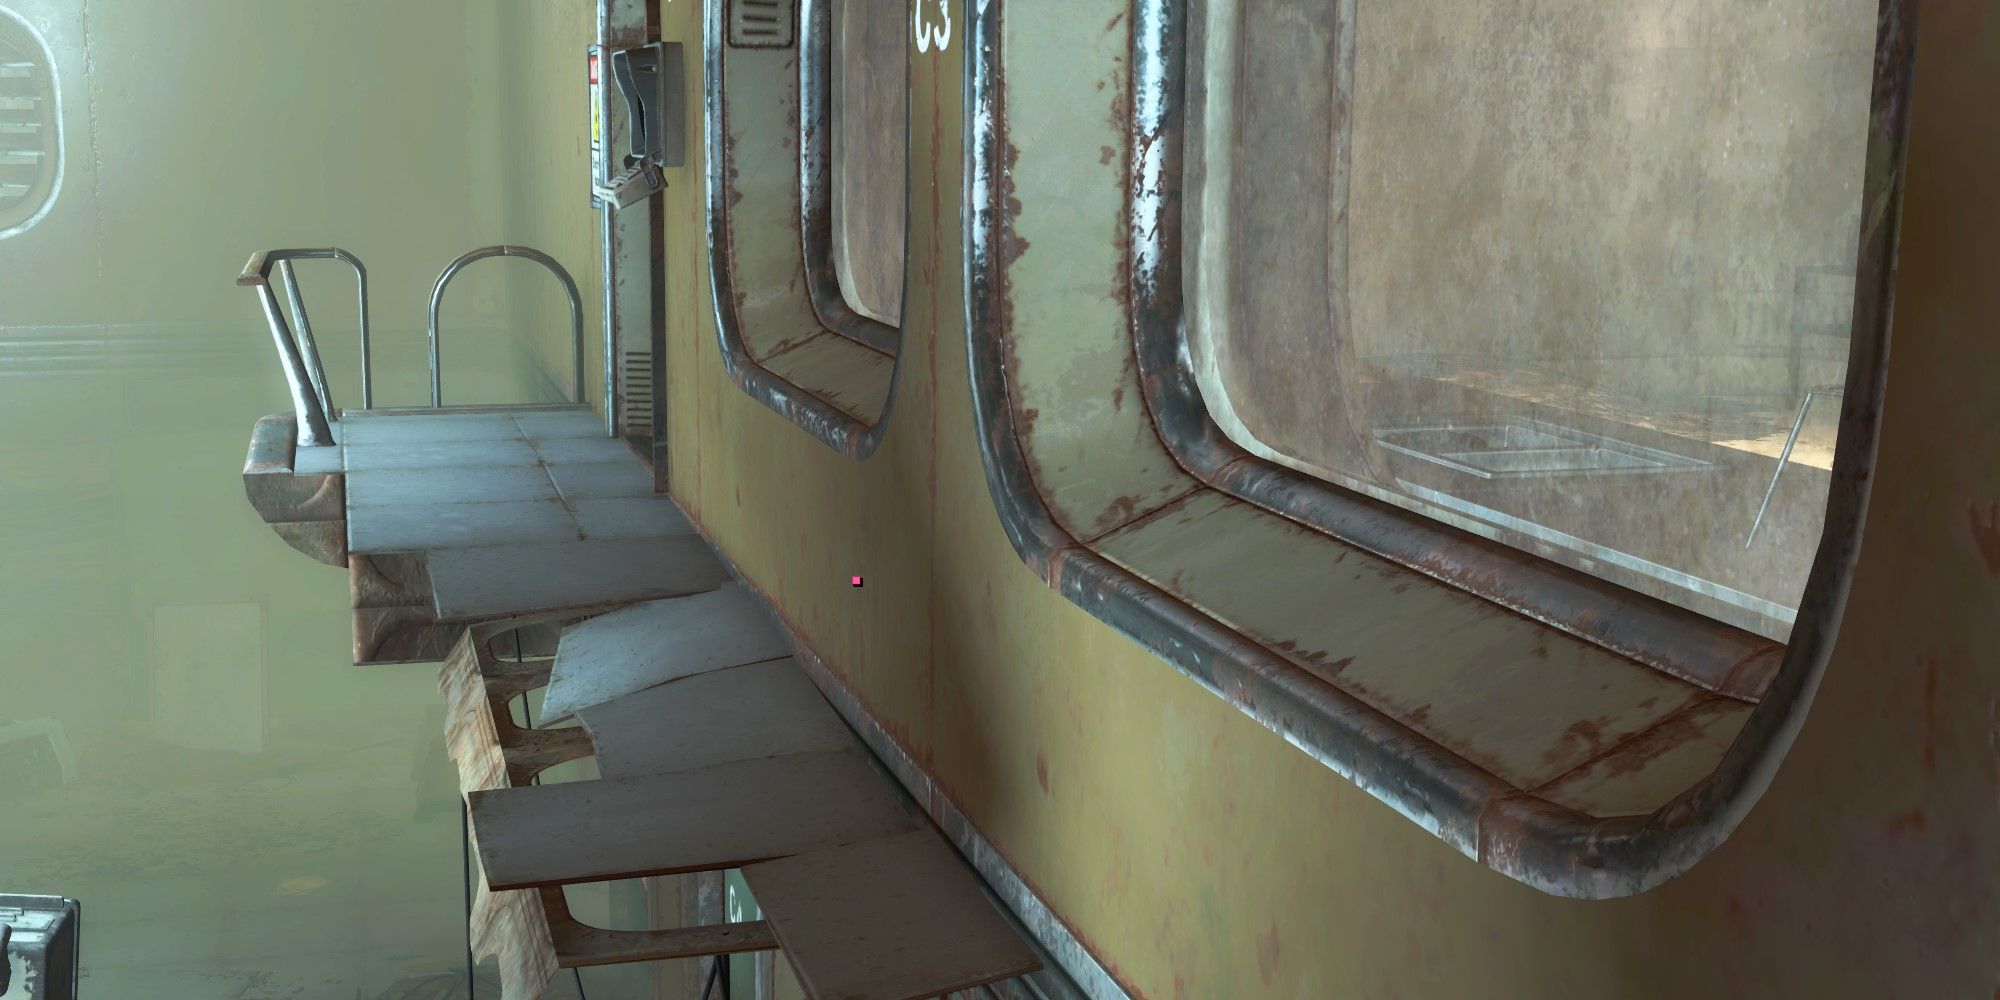 Fallout 4 Cambridge Polymer Labs pathway outside room